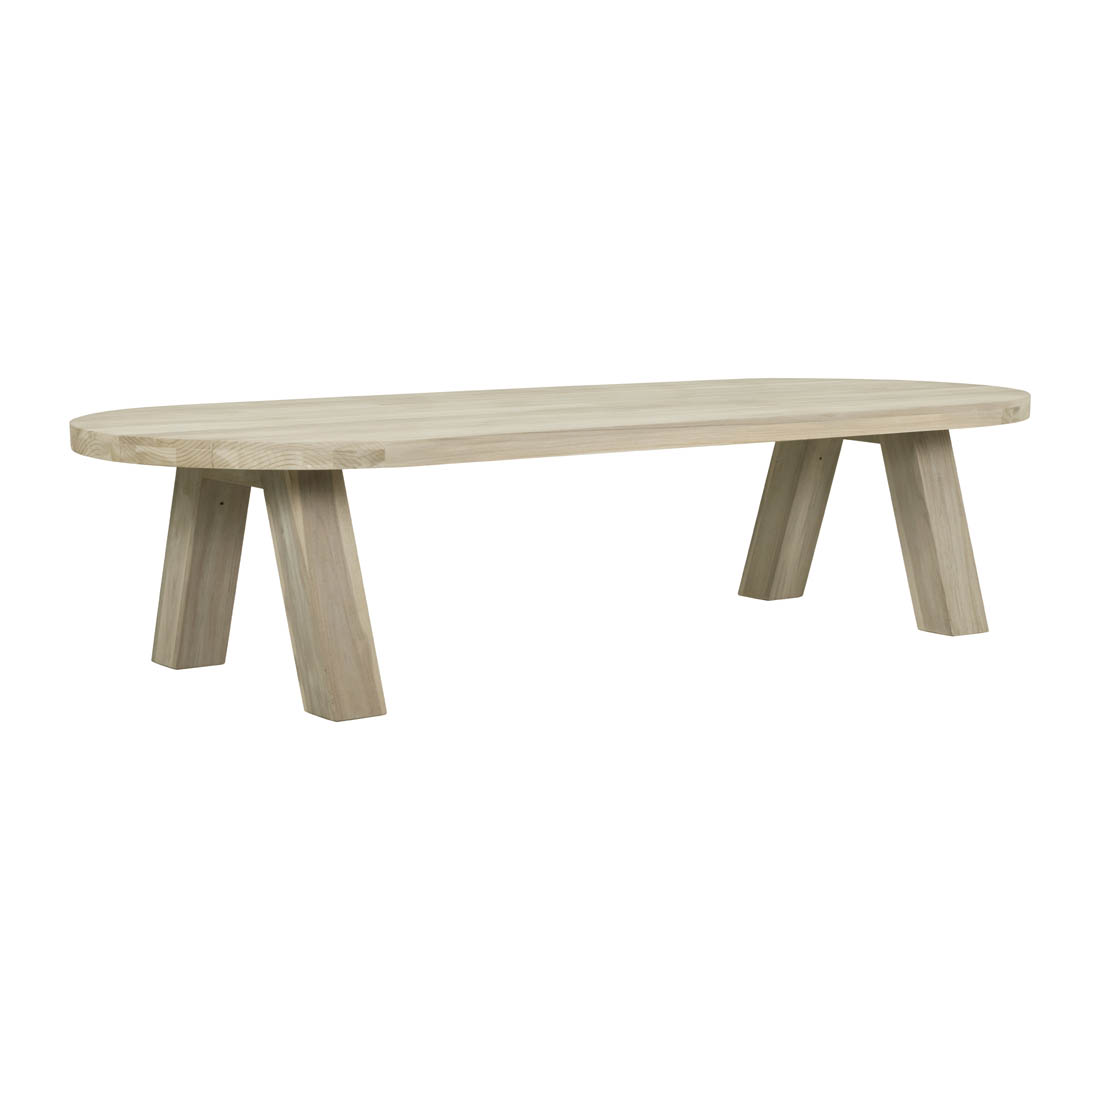 Tide Drift Oval Dining Tables image 1